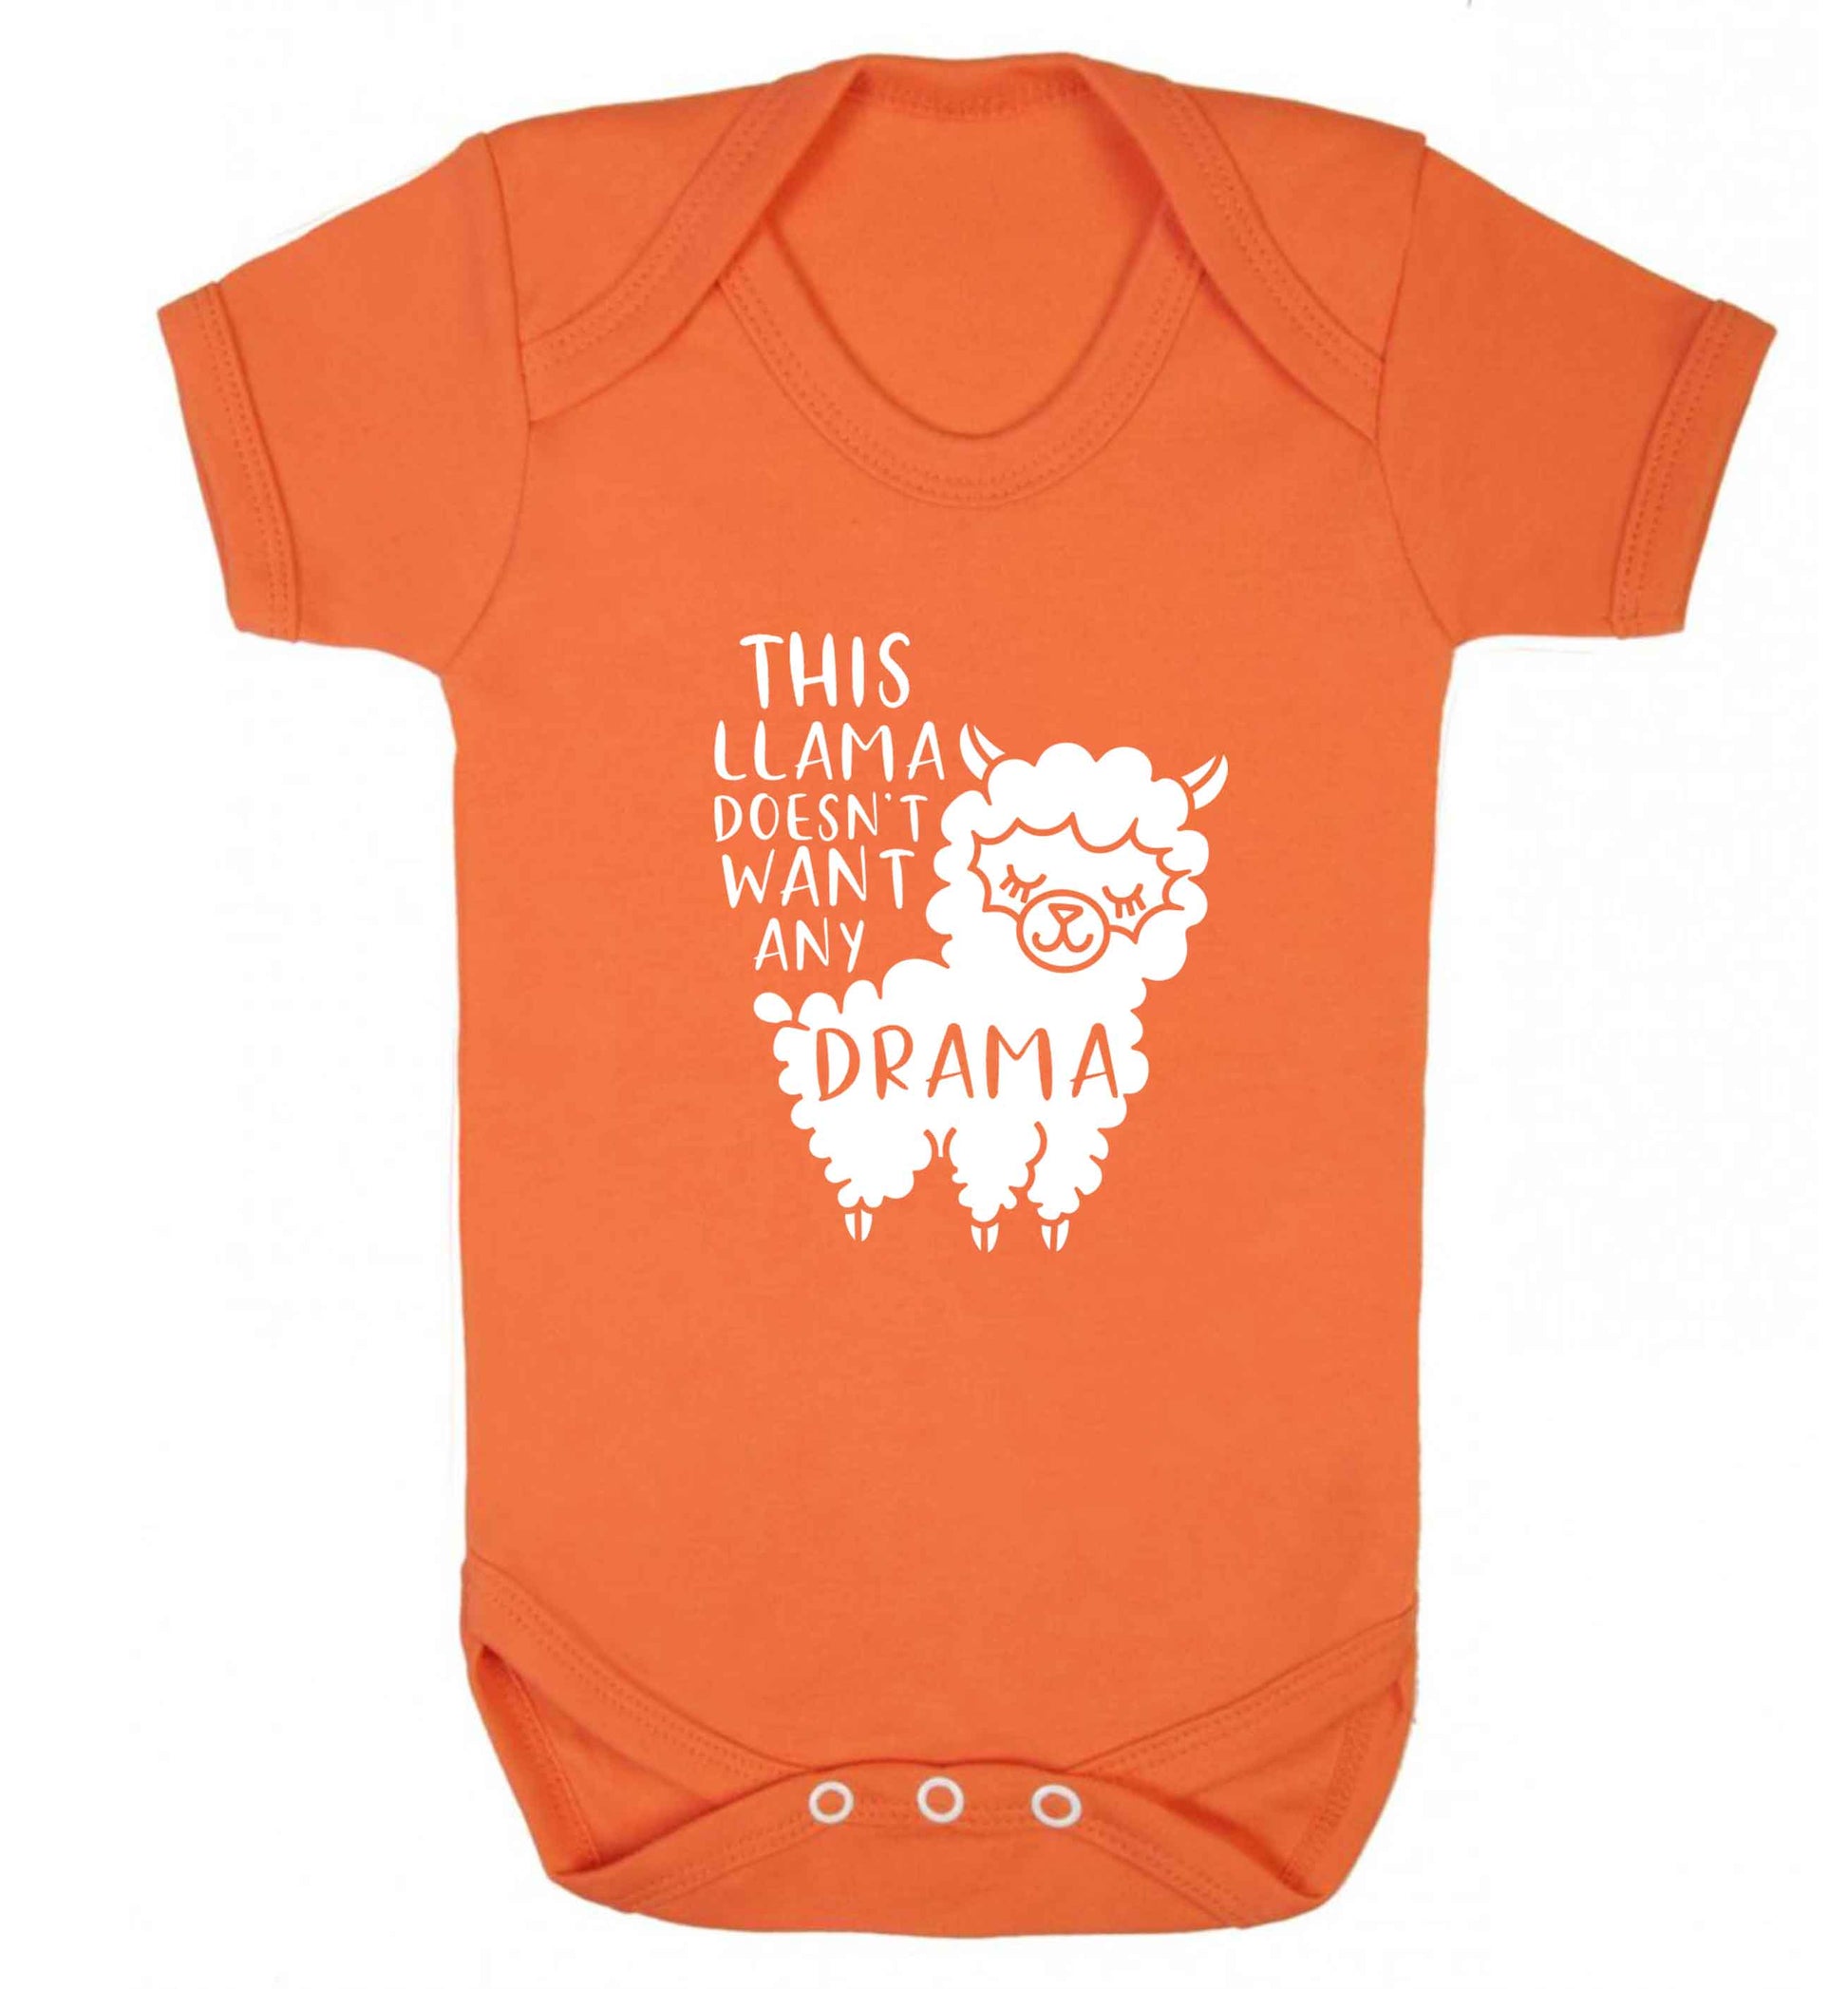 This Llama doesn't want any drama baby vest orange 18-24 months